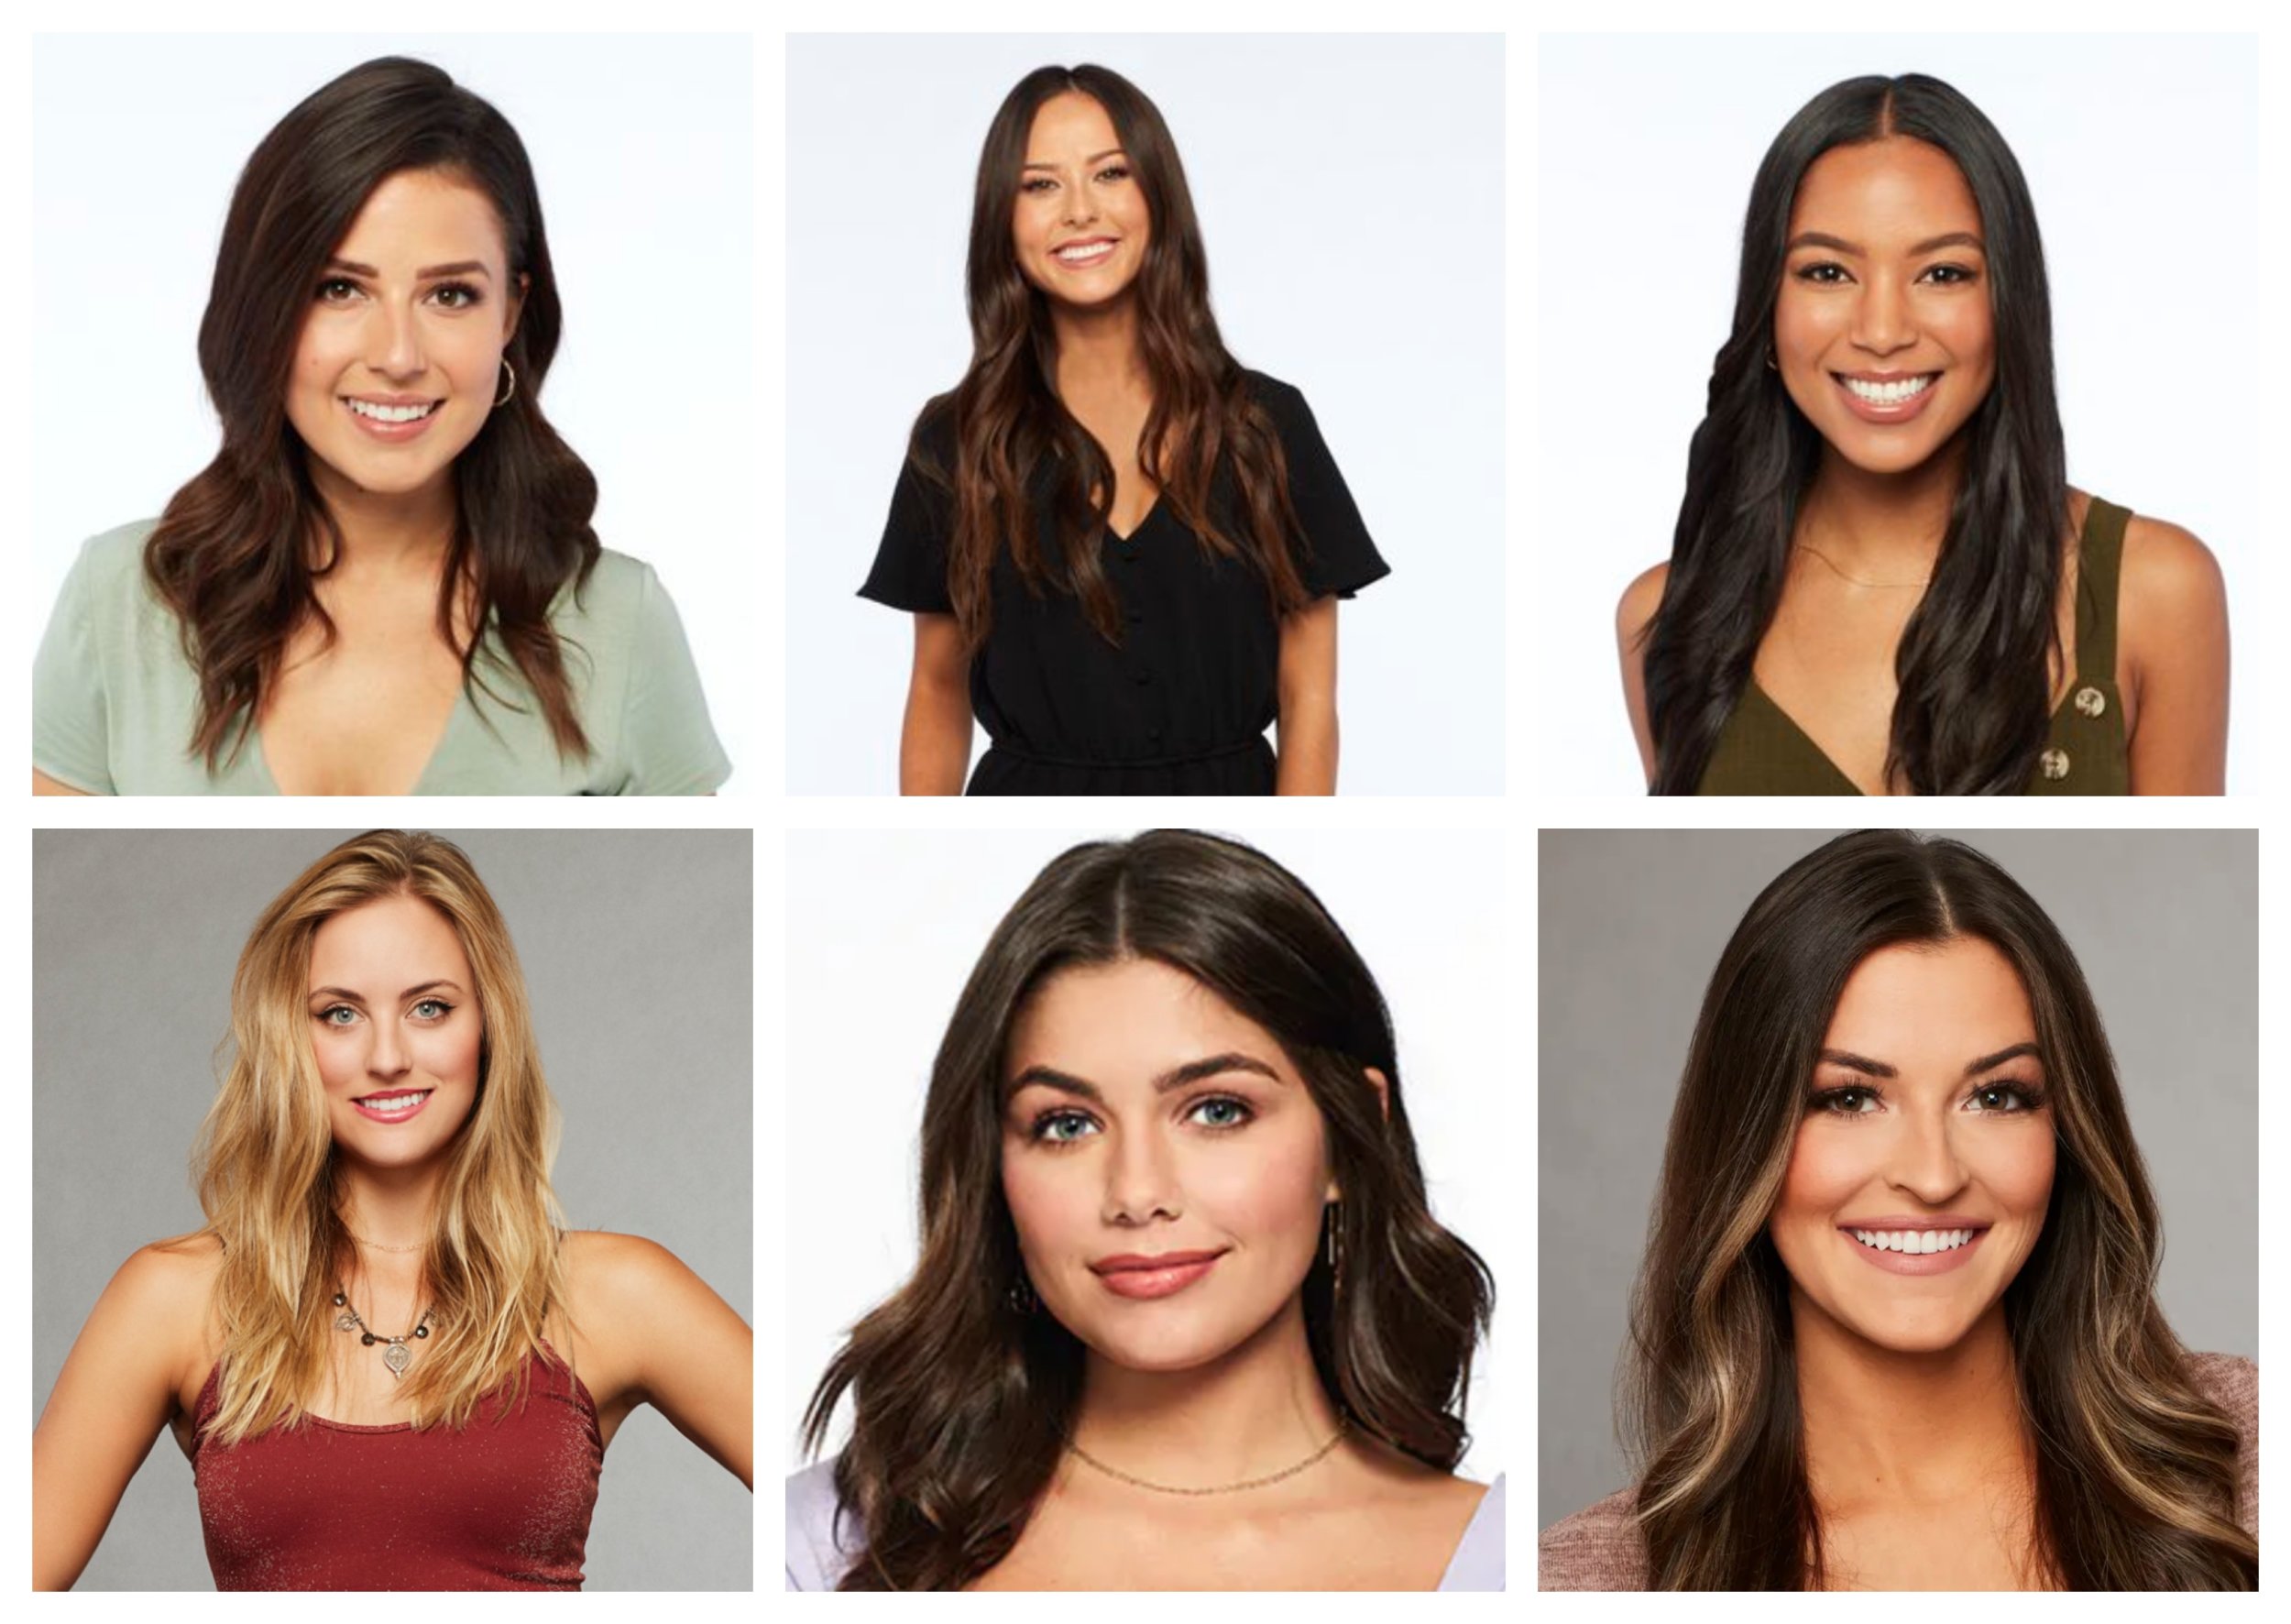 Who Is The Next ‘Bachelorette’? 6 Rumored Contenders For 2021 Season